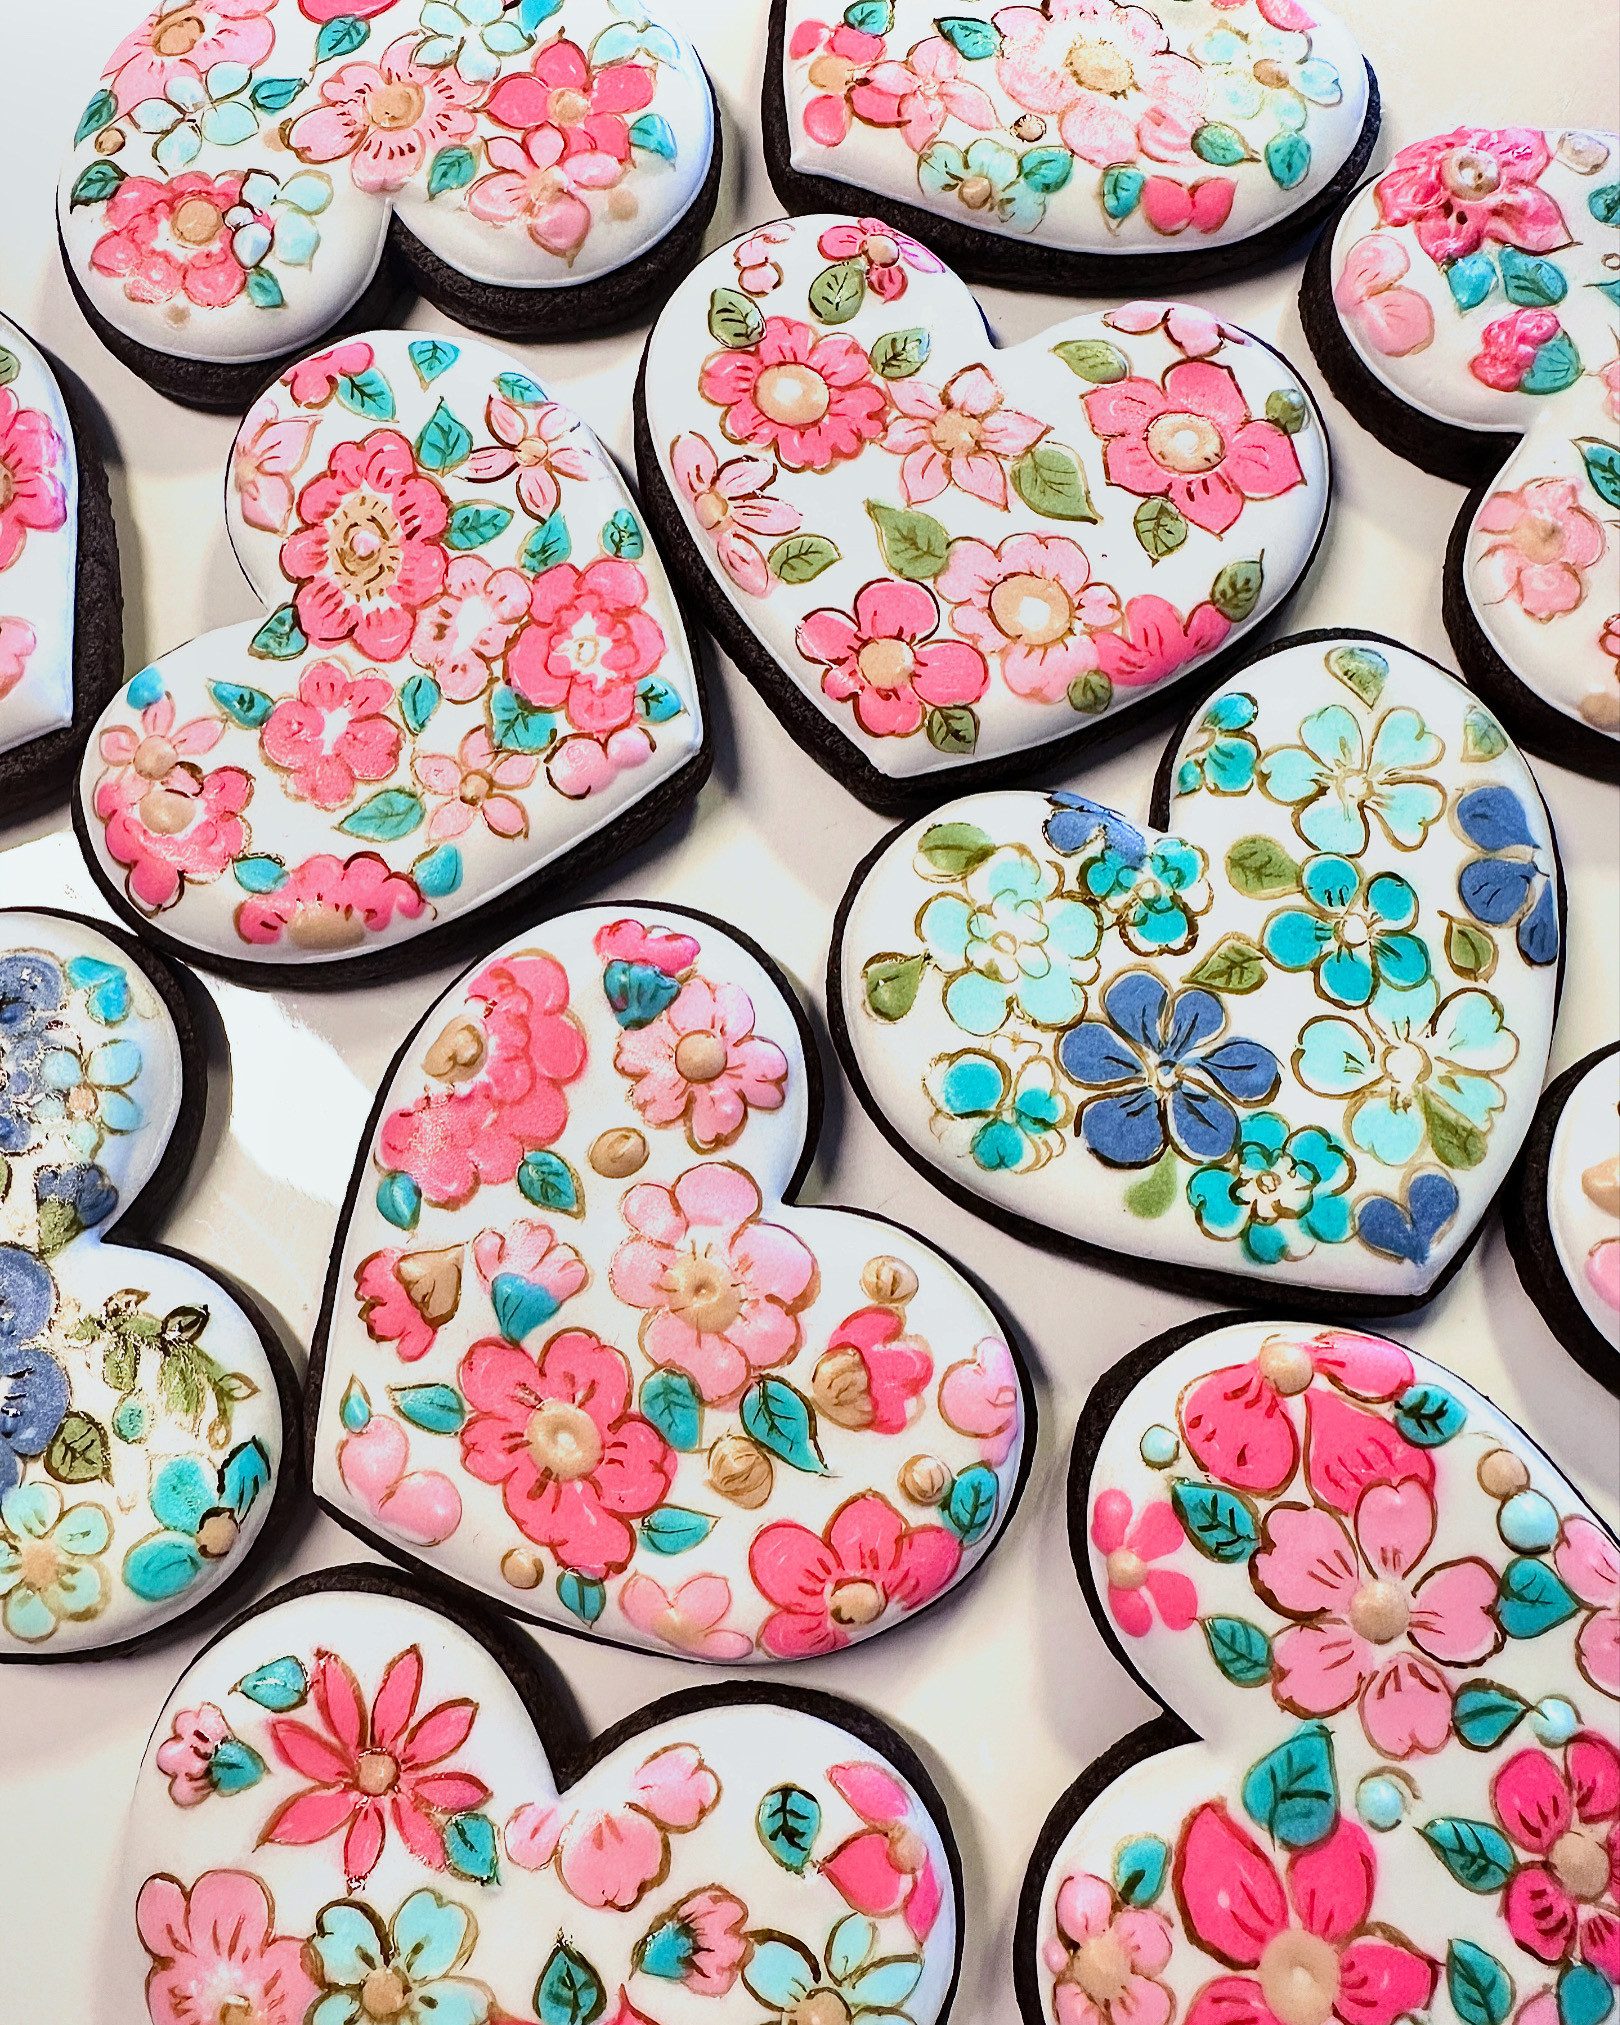 Liberty patterns royal icing cookies for every mom on the earth